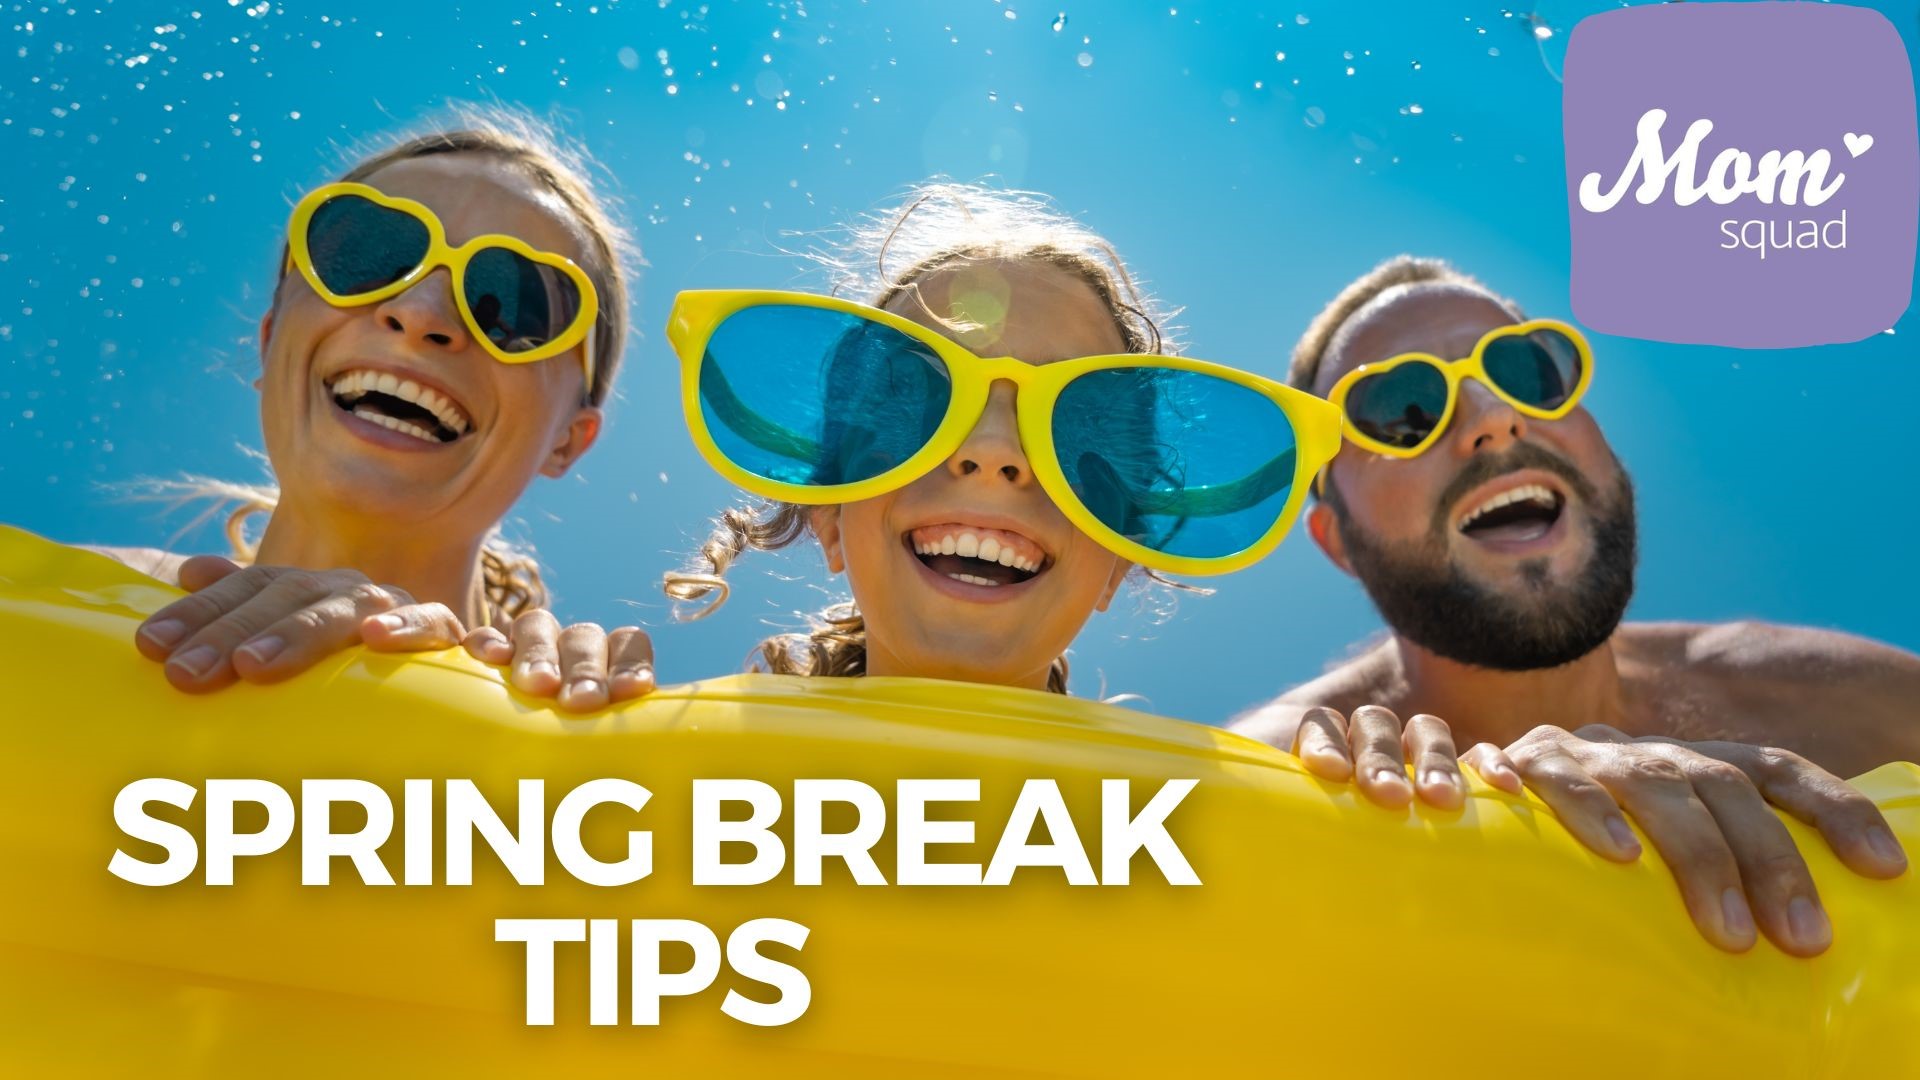 Tips for spring break, whether you're staying or traveling to a destination.  Tips on how to prepare and entertain the kids, plus Easter gift ideas.